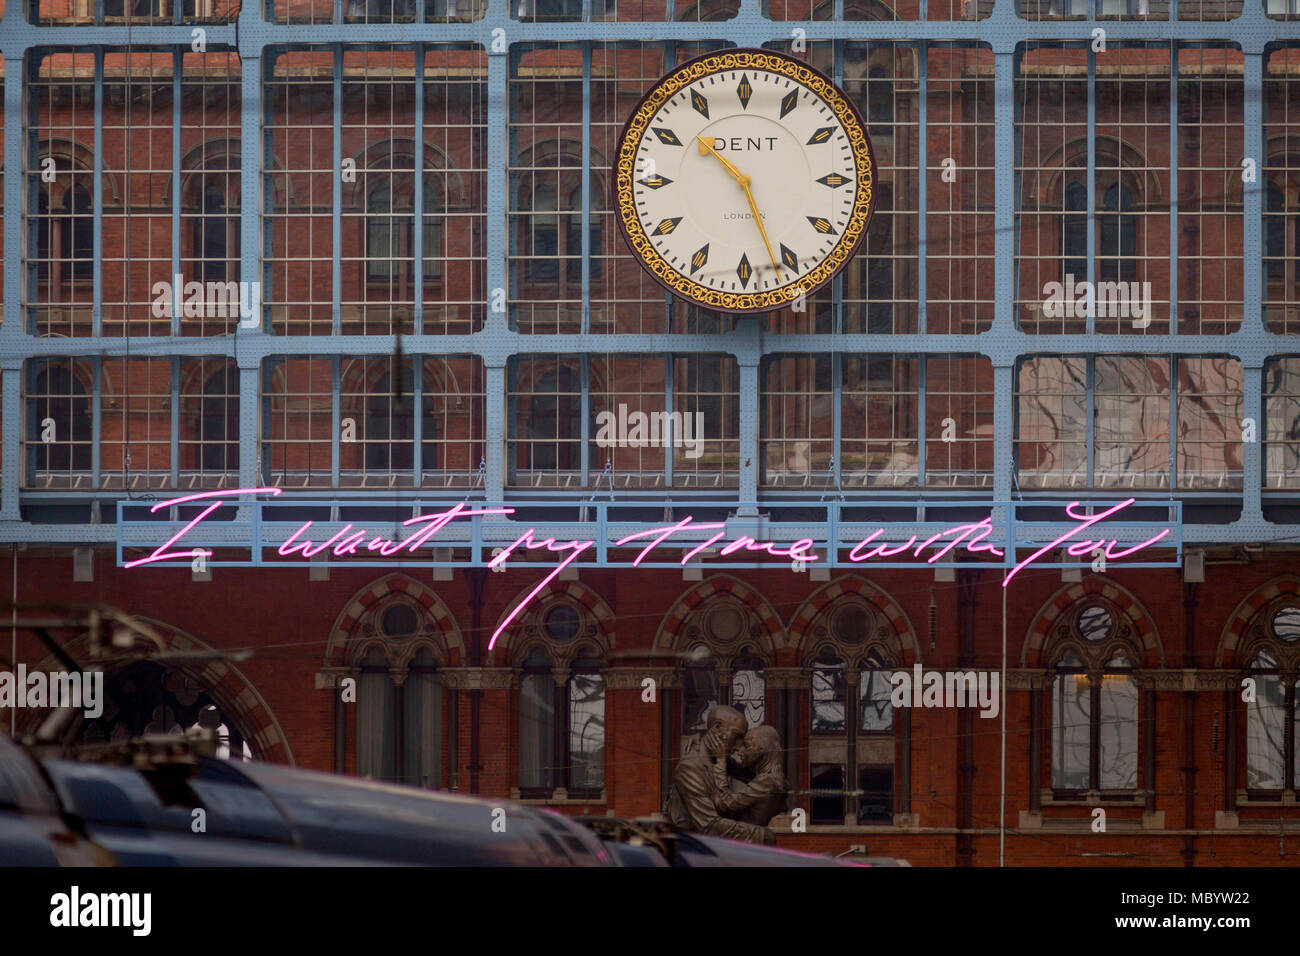 The new artwork entitled 'I Want My Time With You' by British (Britpop) artist Tracy Emin hangs over the main concourse at St. Pancras Station, on 10th April 2018, in London, England. In the sixth year of the Terrace Wires Commission - and in celebration of the 150th anniversary of St Pancras International and the 250th anniversary of the Royal Academy of Arts, at one of London's mainline station, the London hub for Eurostar - the 20 metre-long greeting to commuters reads 'I Want My Time With You' and Emin thinks that arriving by train and being met by a lover as they put their arms around the Stock Photo